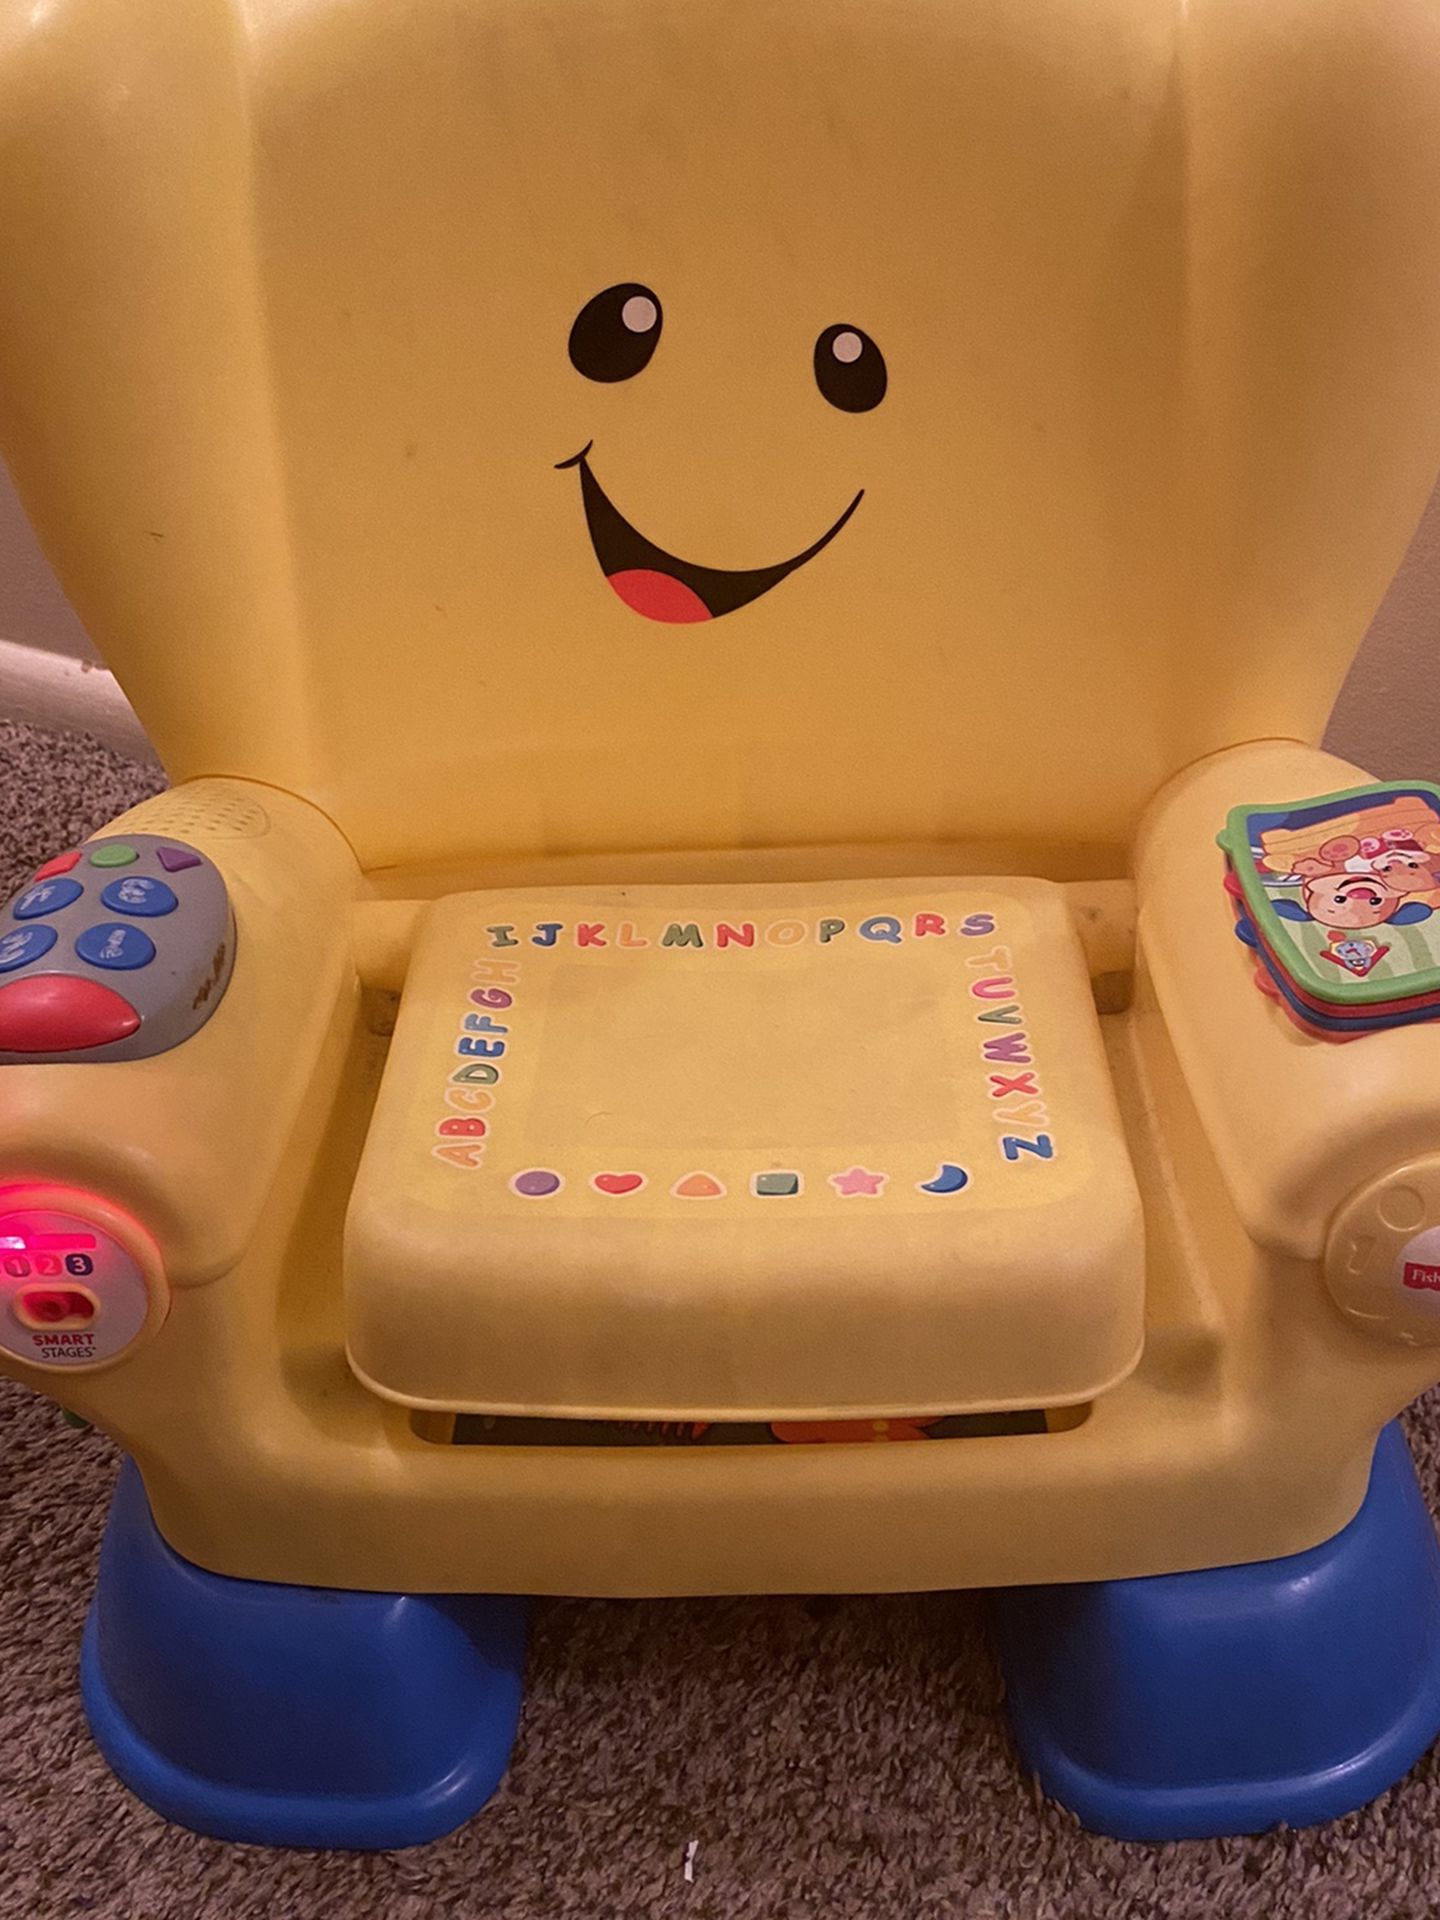 Kids Learning Chair